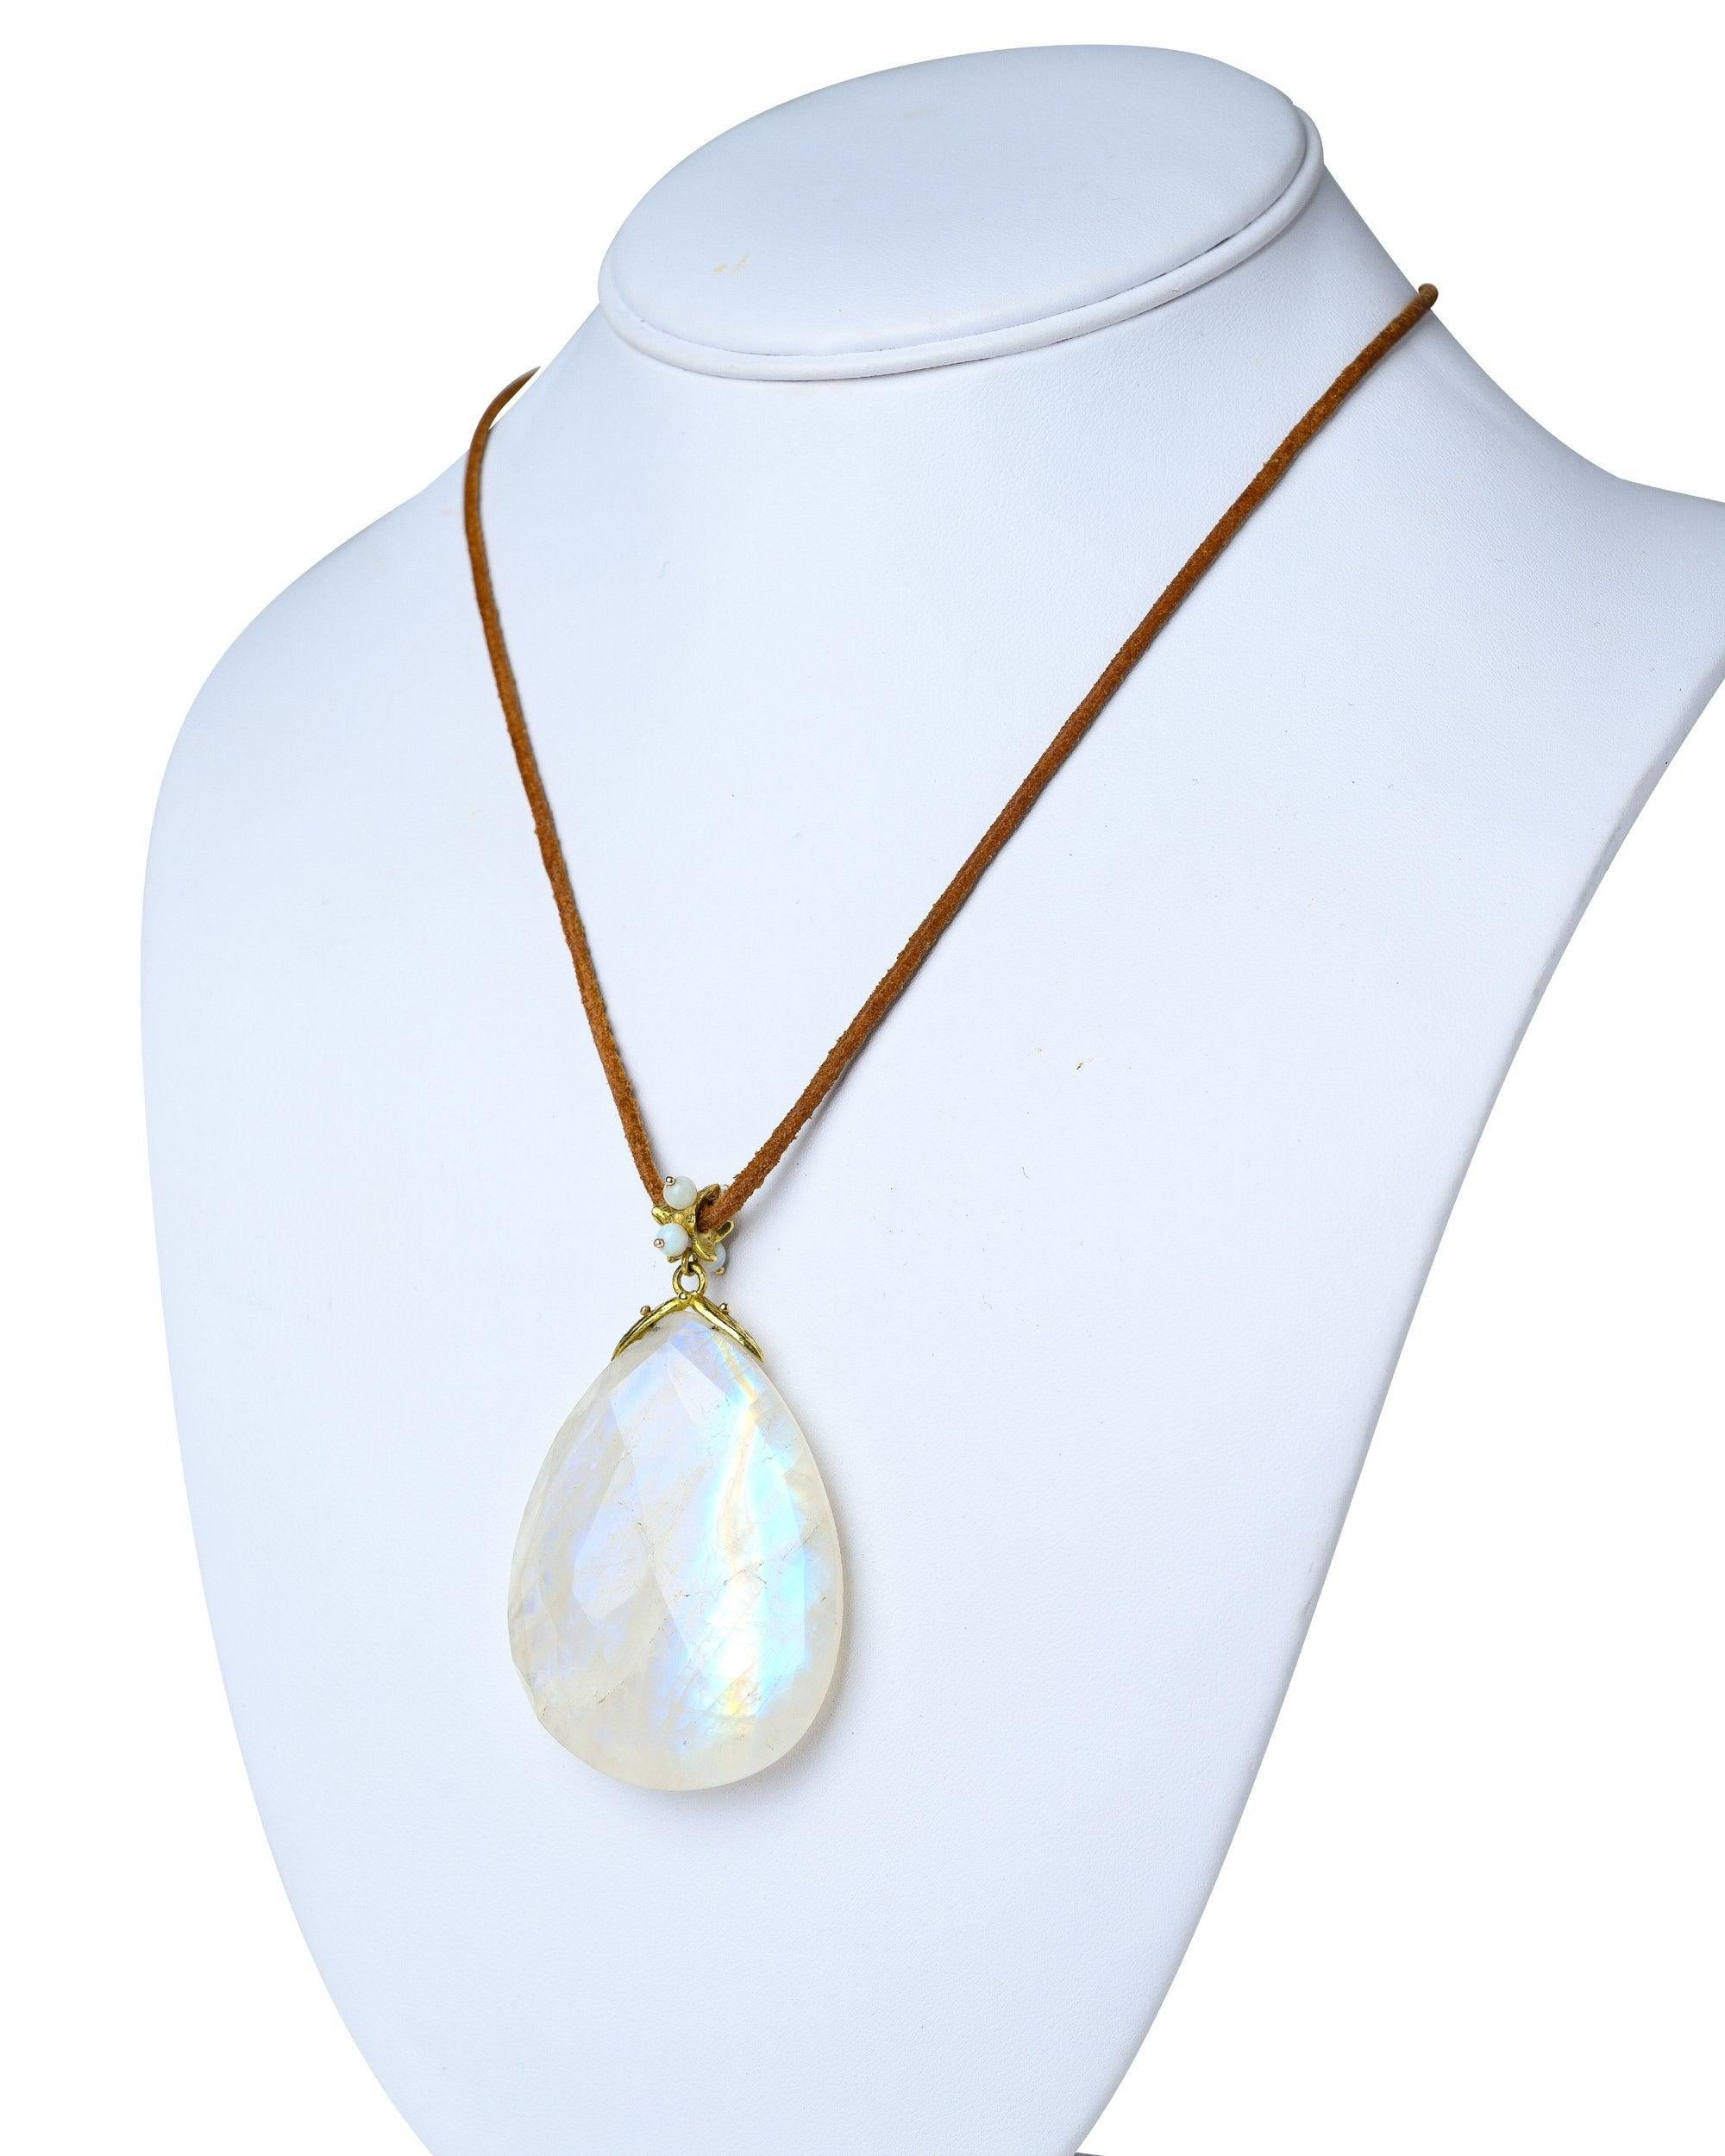 50x37x10mm thick faceted moonstone teardrop 18K double seed setting pendant w/18k opal bead bail on leather cord (approx 2